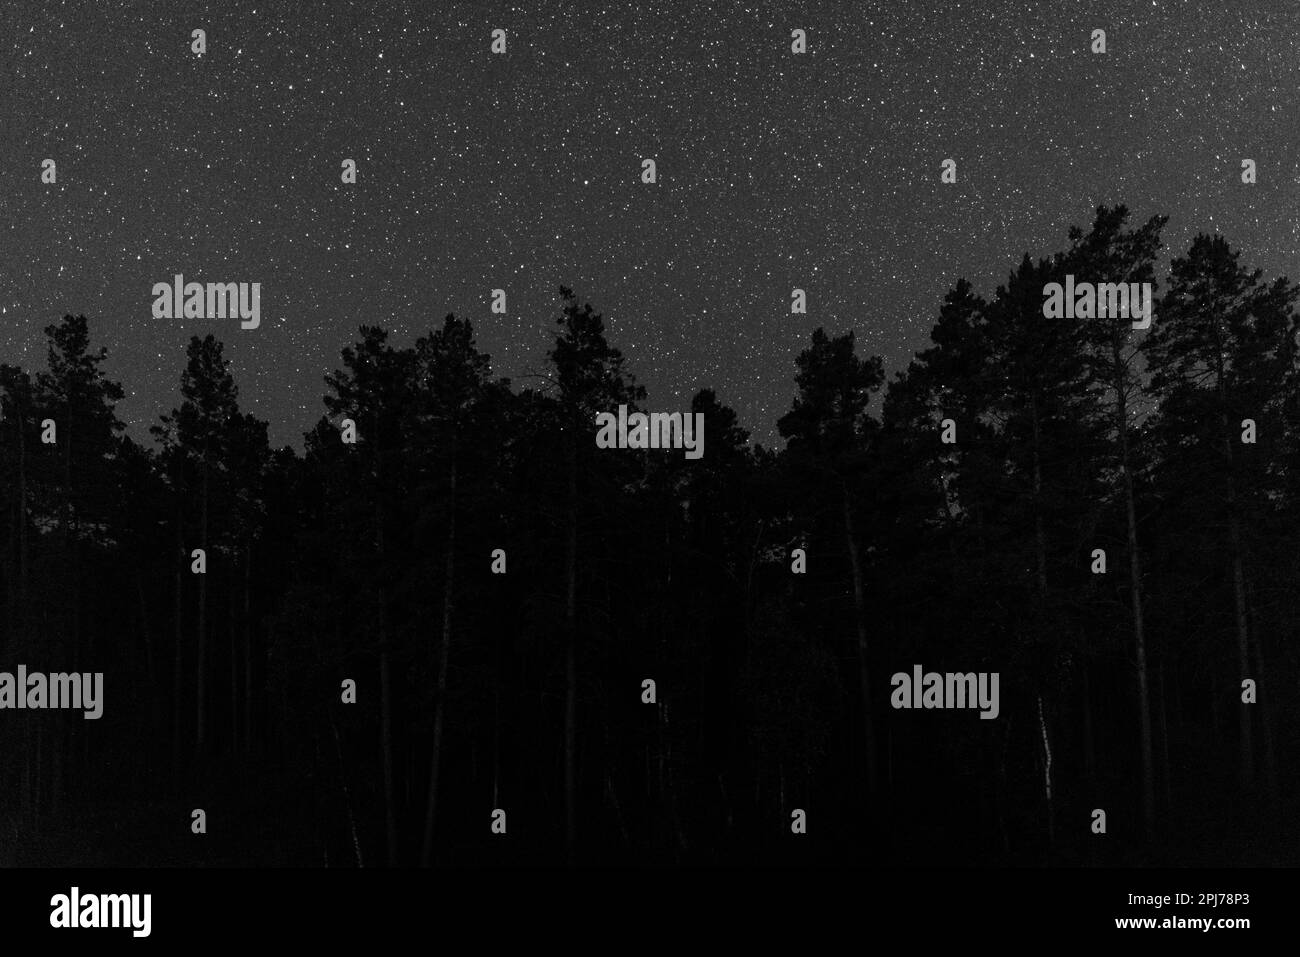 Bright stars in the dark sky on the silhouettes of trees Stock Photo